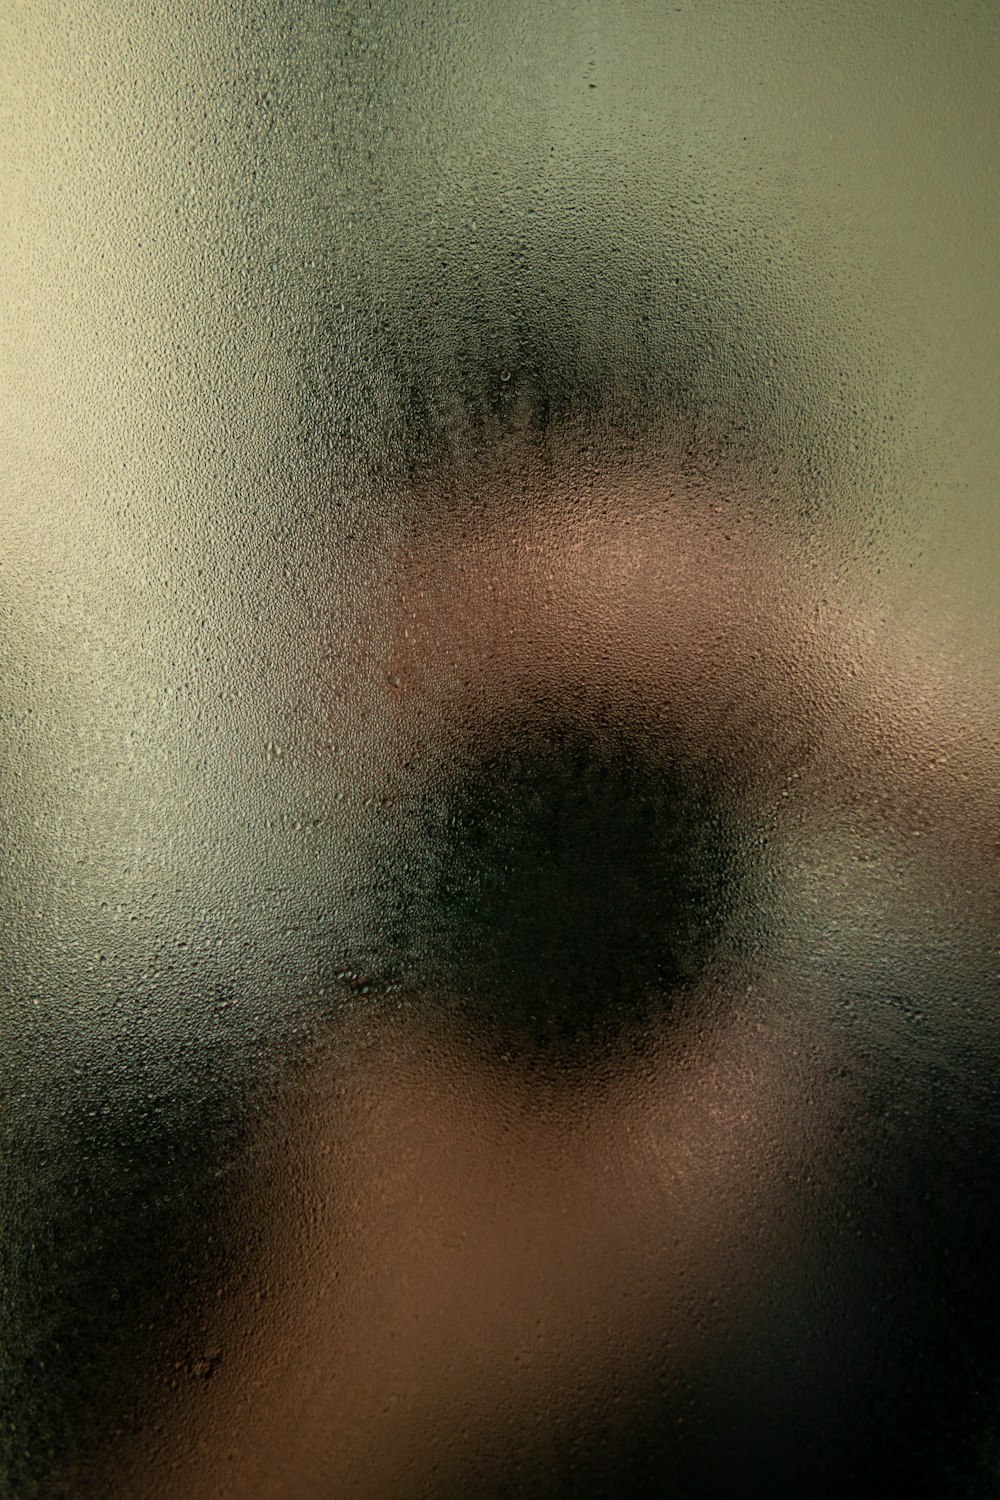 a blurry image of a person's face behind a frosted glass door